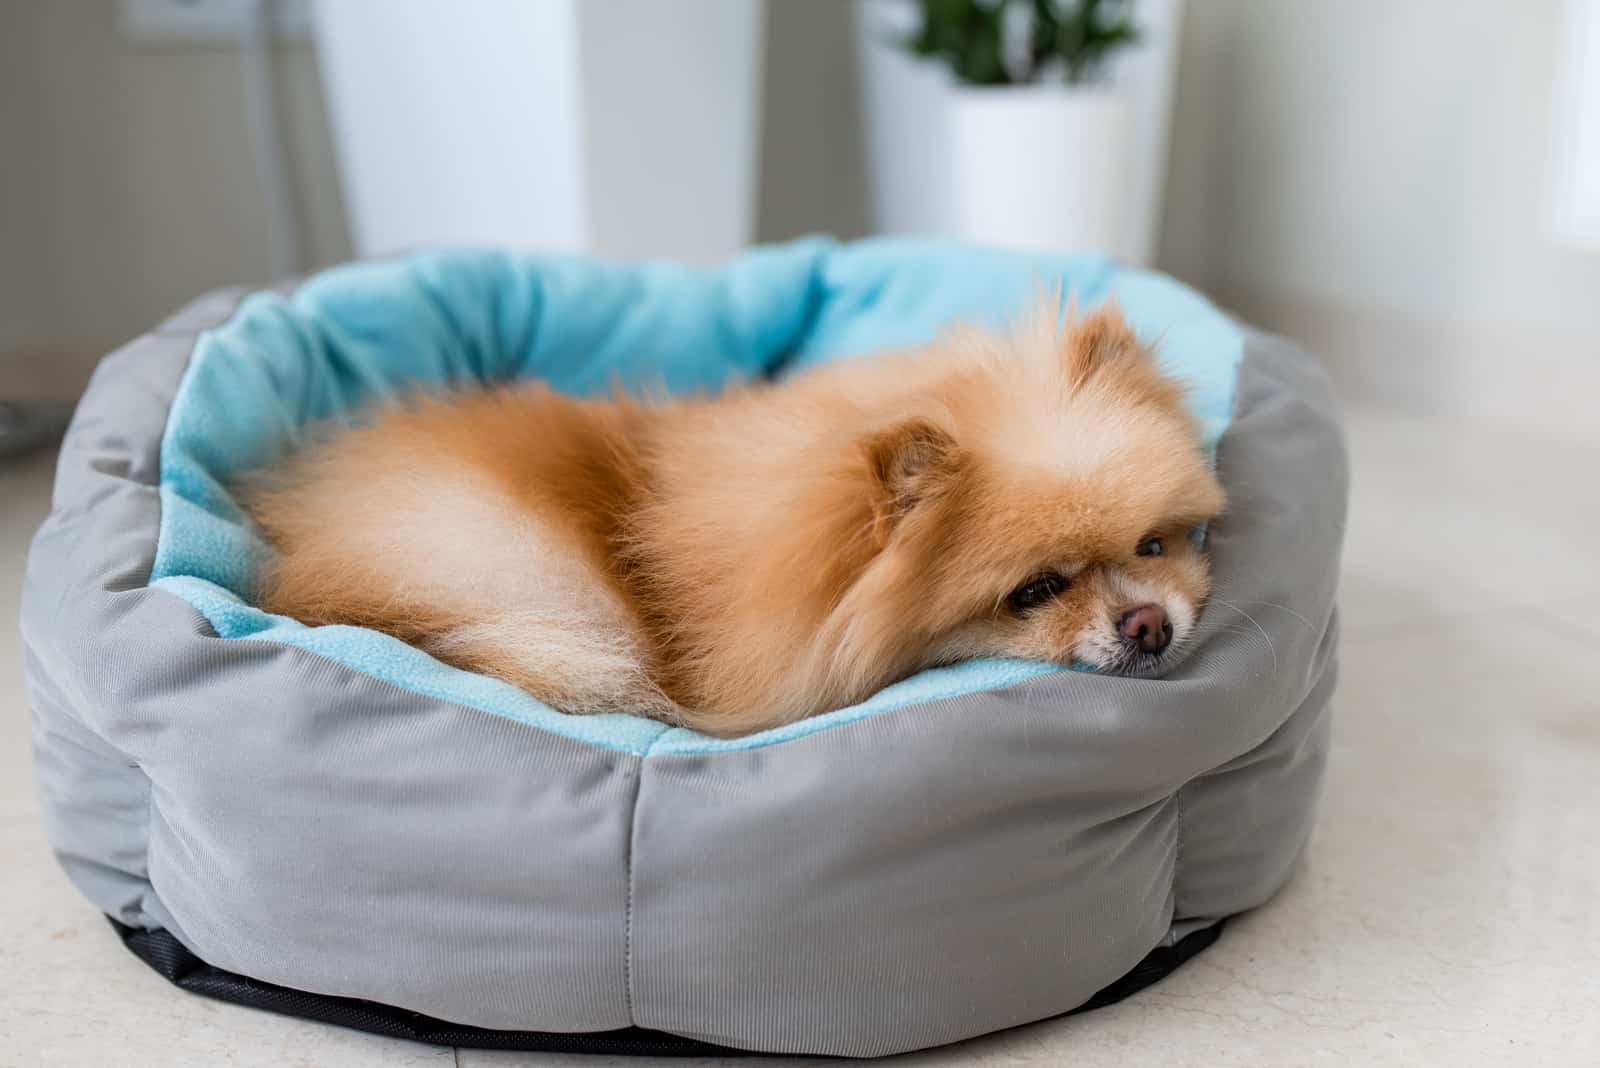 7 Best Dog Beds For Pomeranians: Top Choices Poms Will Love